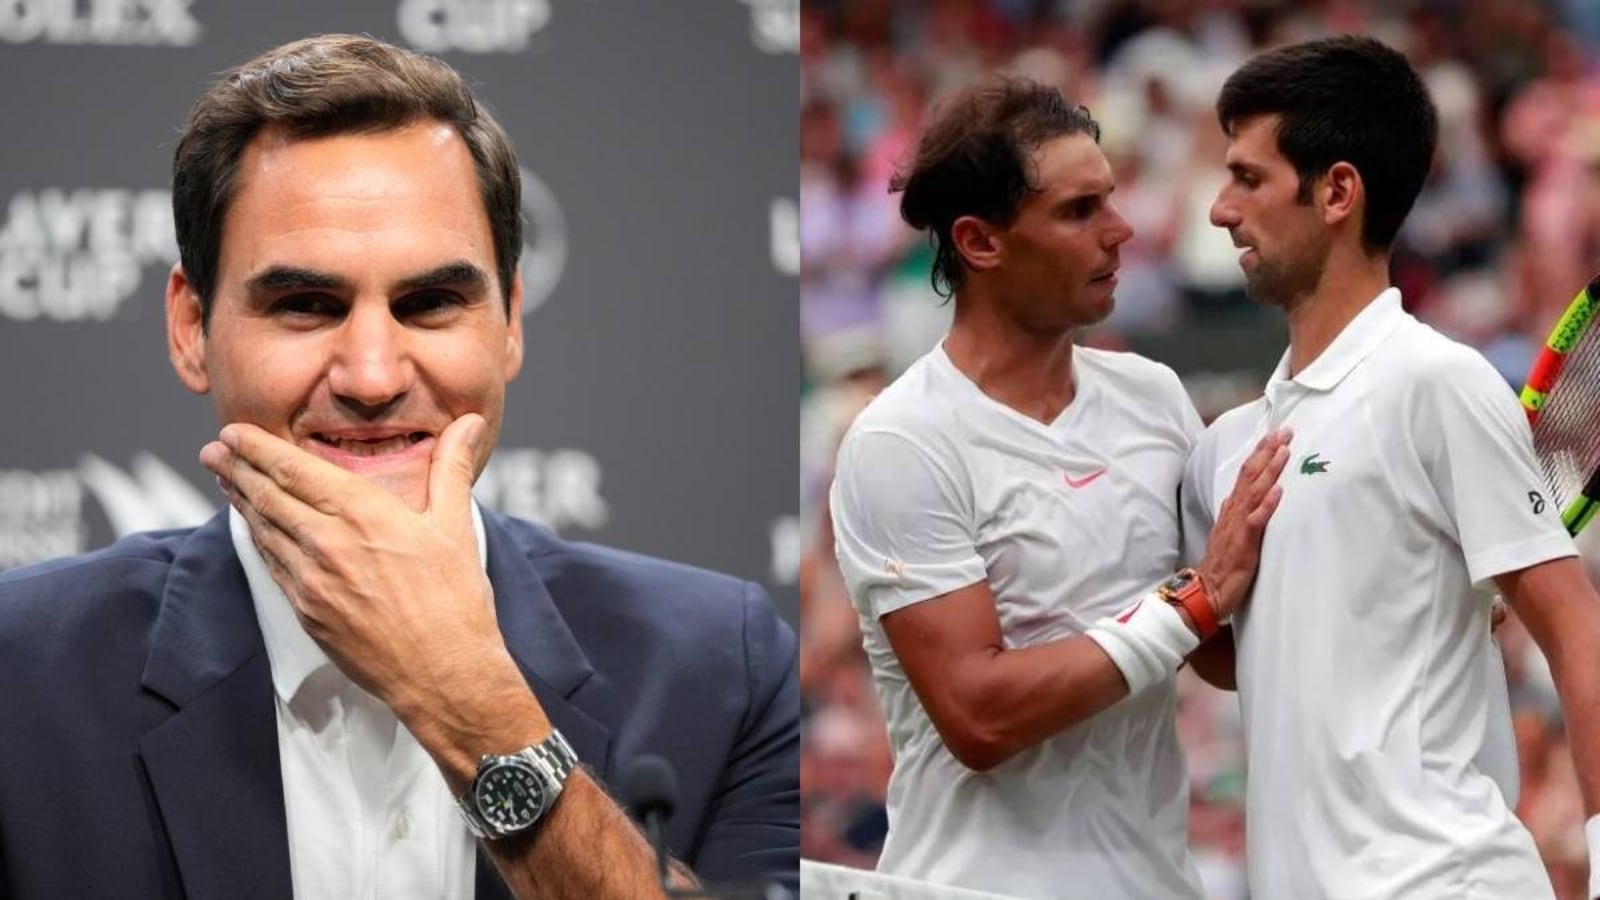 ‘Come on, OK? There can’t be that many ‘GOATs”: Federer’s epic reply to Greatest of All Time debate on him, Rafa, Novak